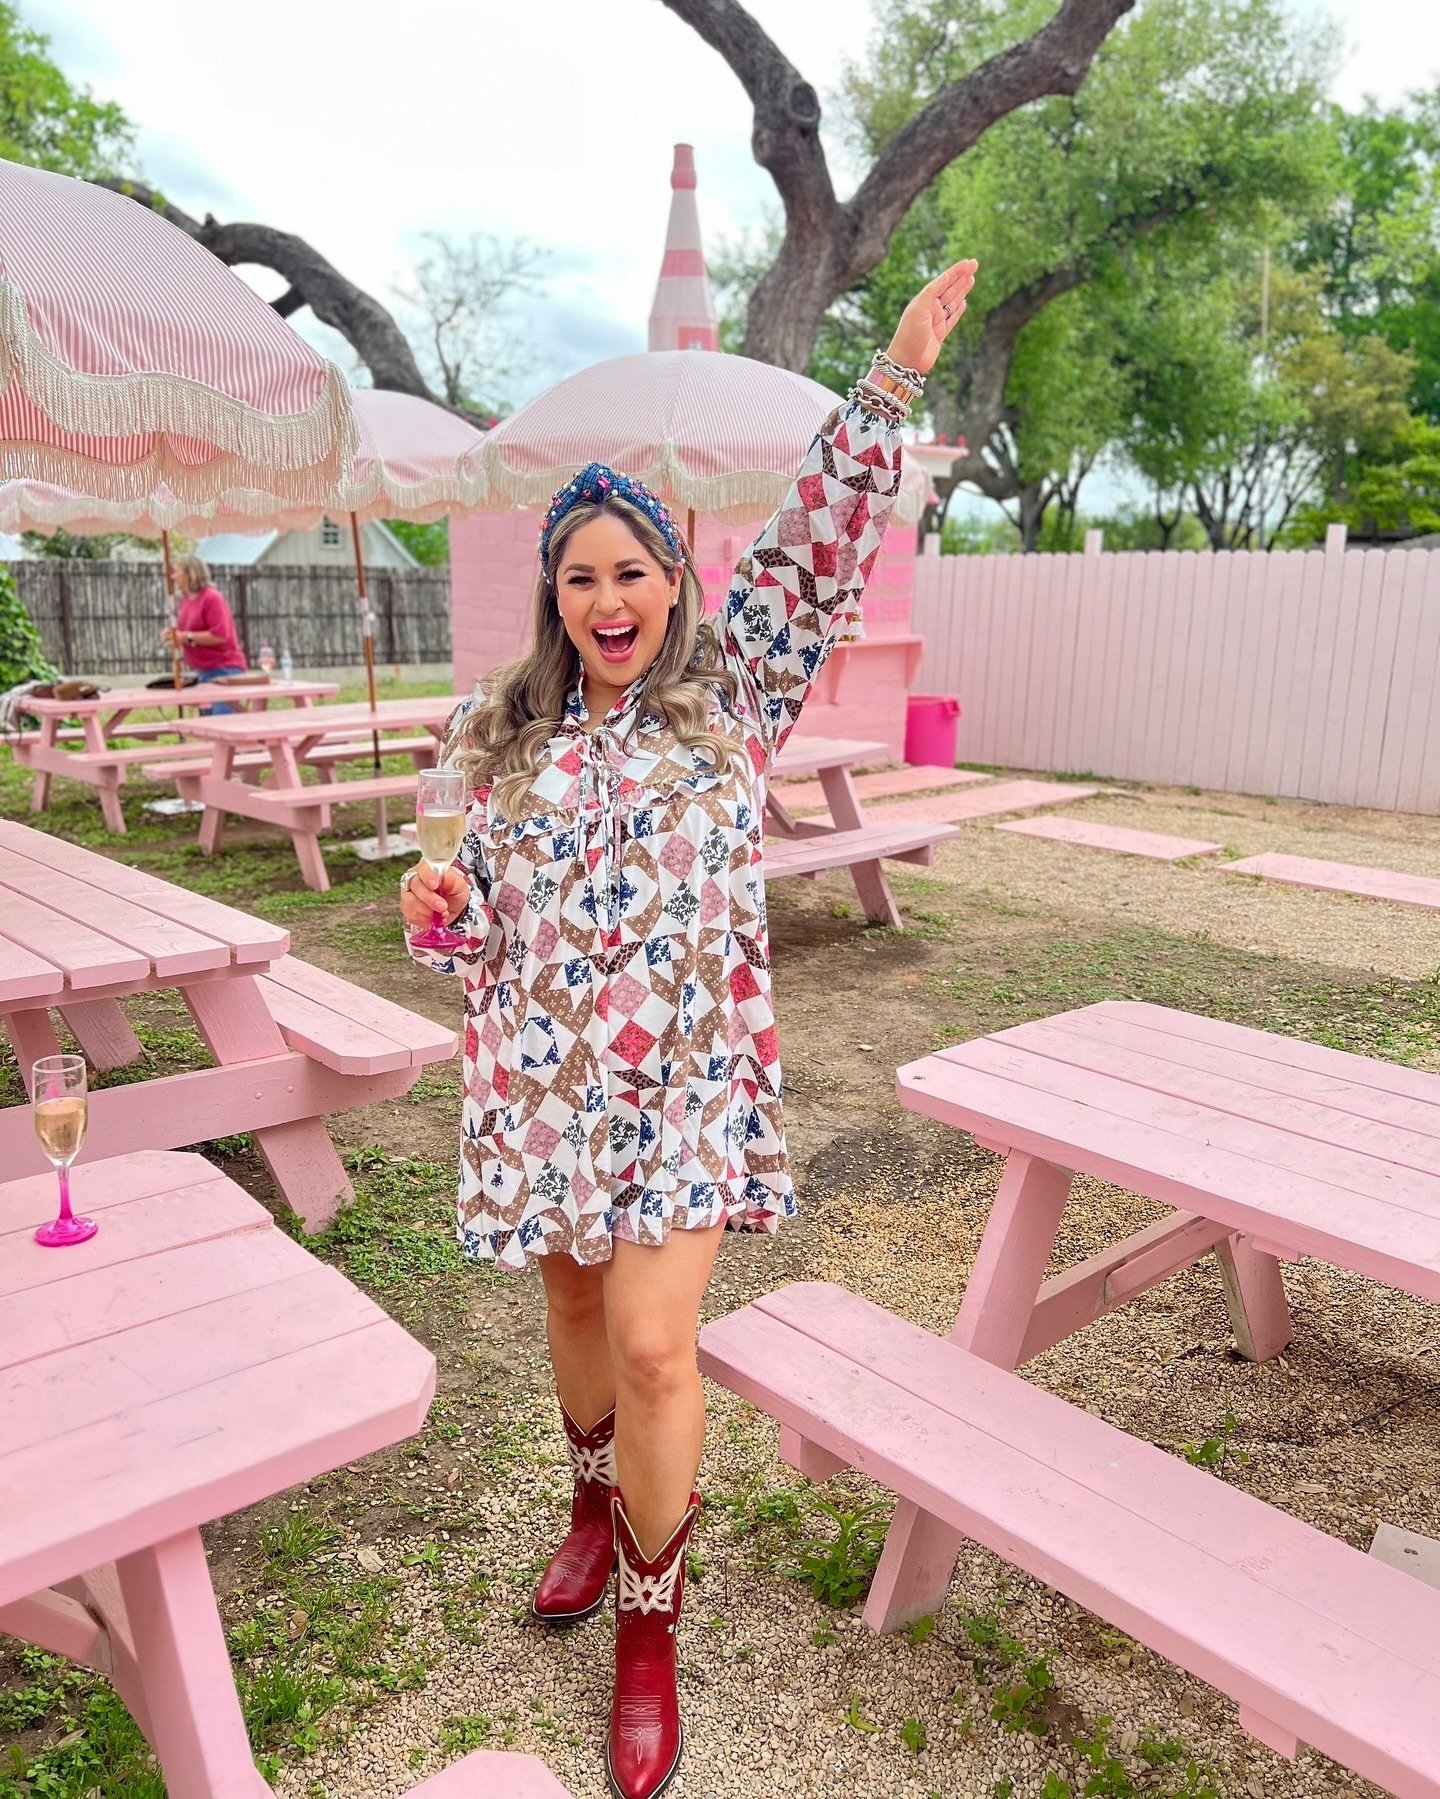 Cheers to the weekend 💖💖 This outfit has been on repeat! 
Dress @smithandquinn 
Boots @frauleinboots 

#stylinbrunette #smithandquinn #summerlook #summeroutfit #frauleinbootcompany #pink #texas